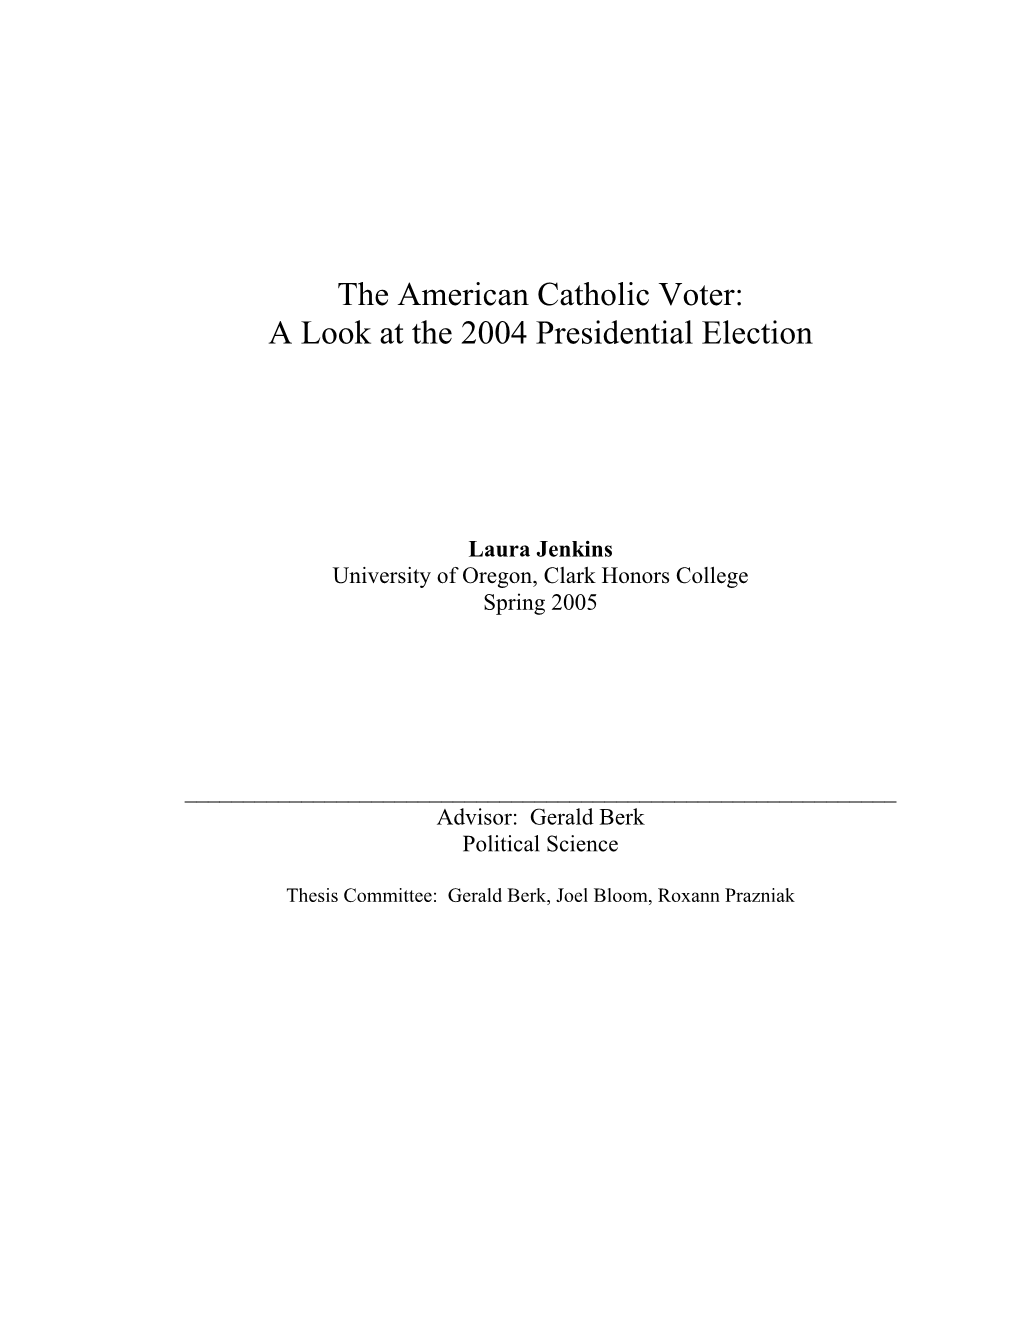 The American Catholic Voter: a Look at the 2004 Presidential Election